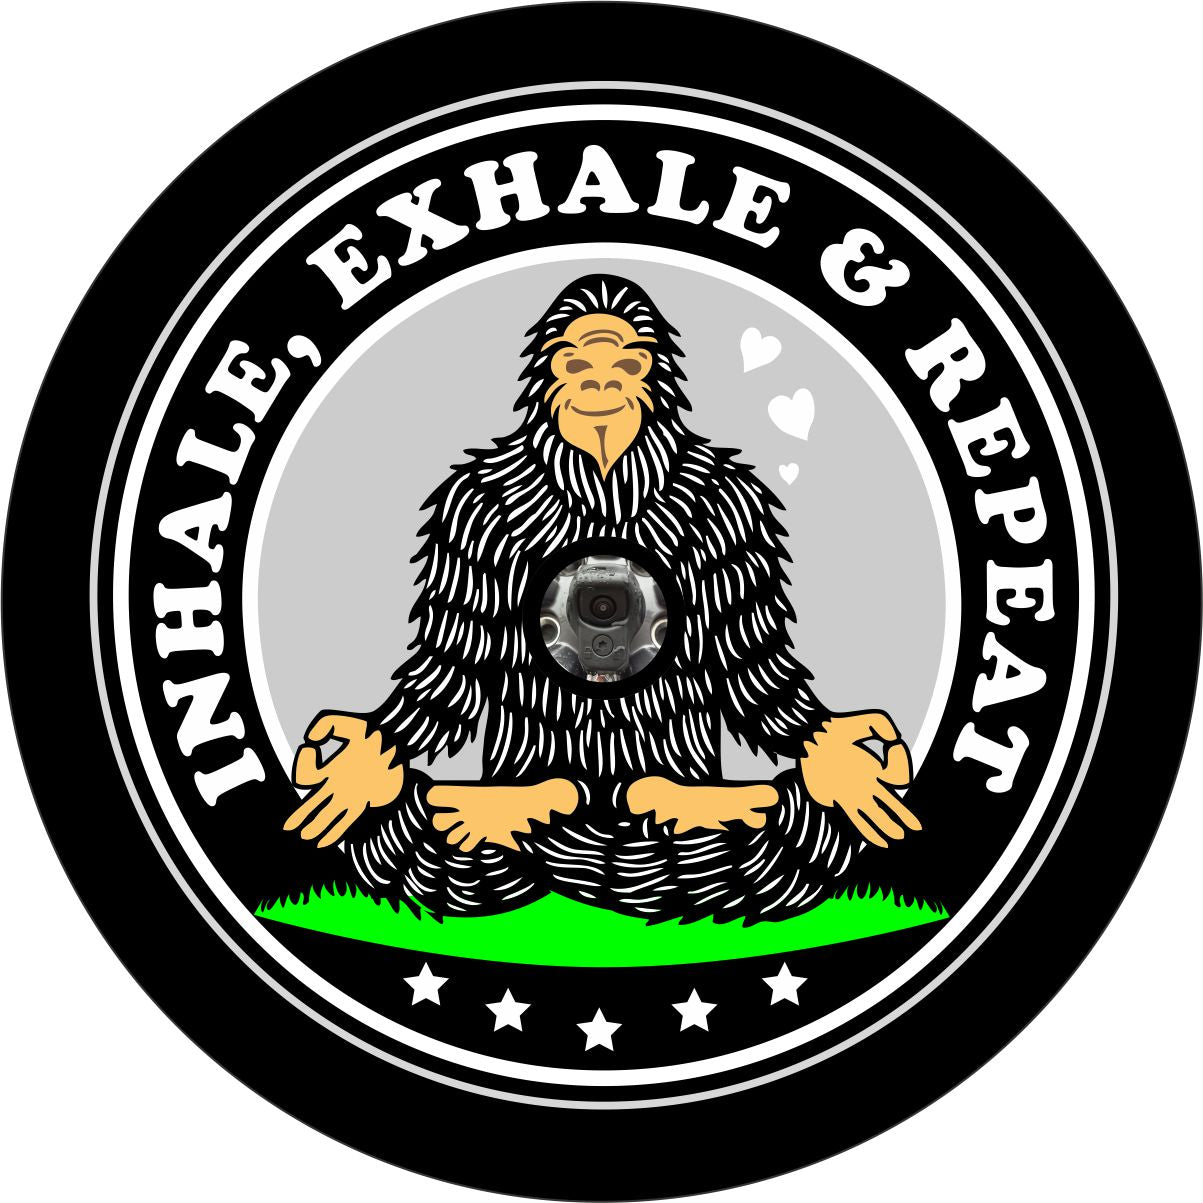 Sasquatch bigfoot taking some zen moments, meditating bigfoot doing inhale, exhale, repeat funny spare tire cover design for RV, Camper, Jeep, Bronco, etc. with a hole for a back up camera